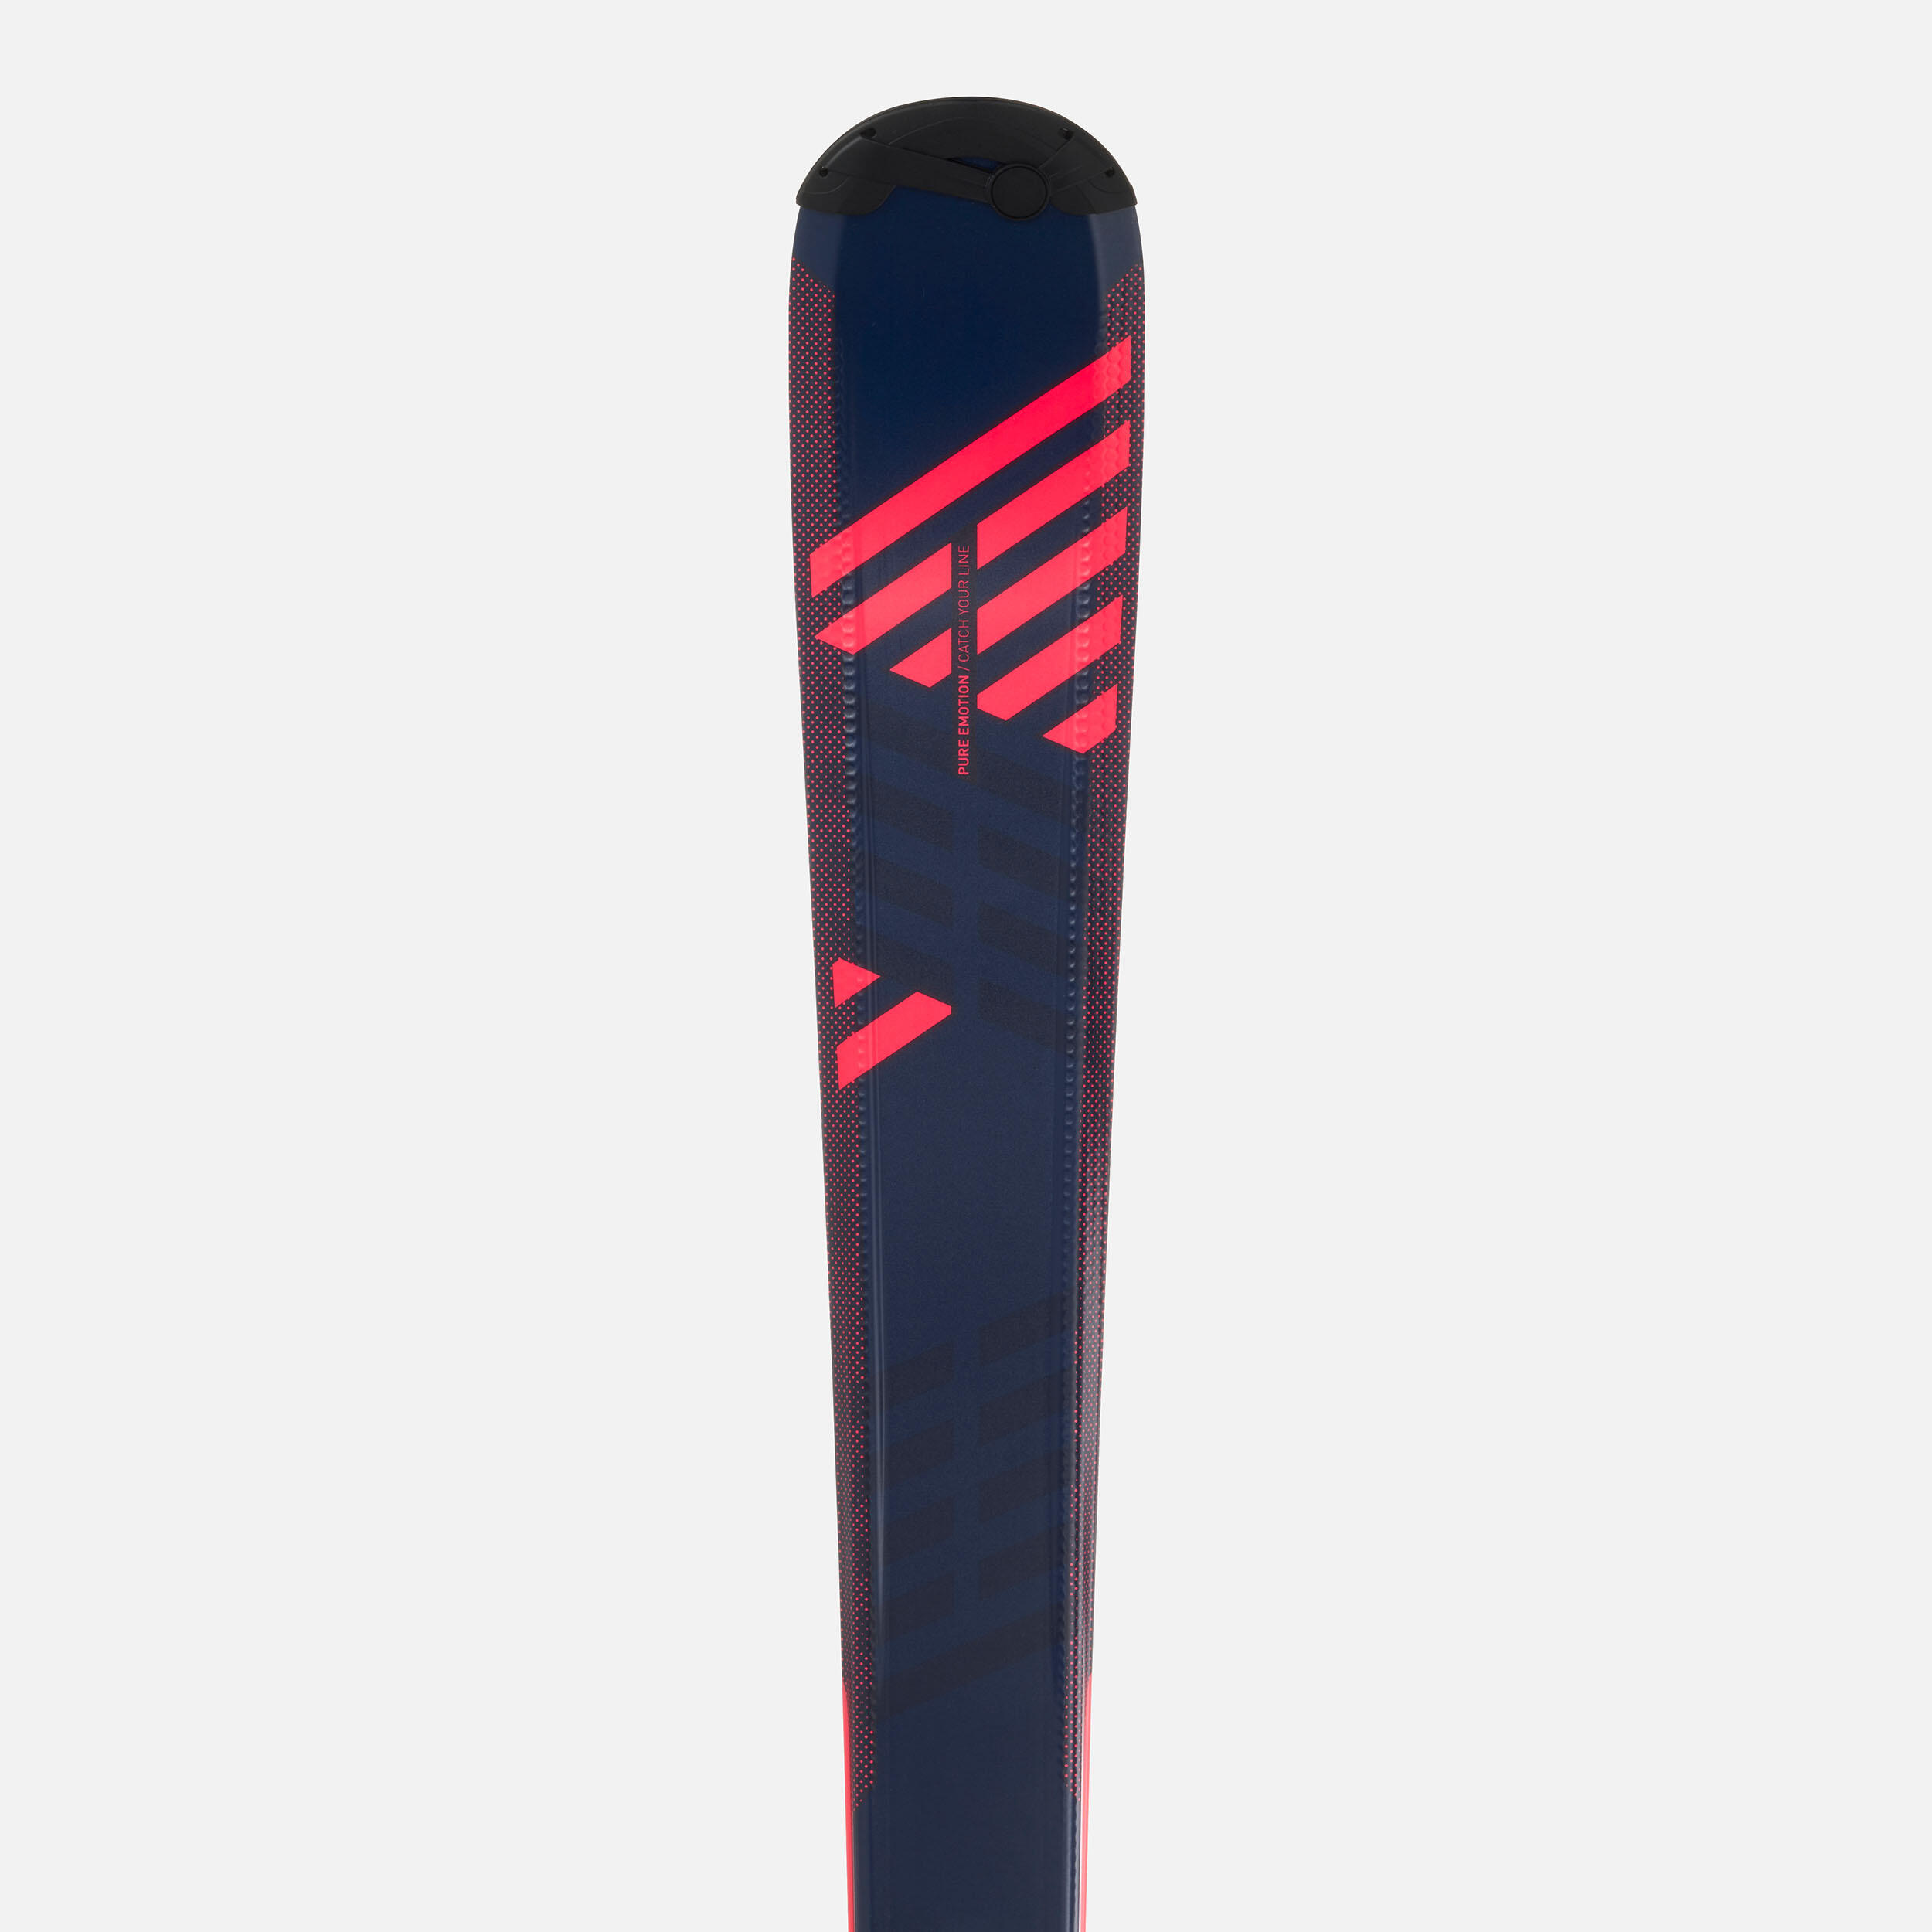 WOMEN’S DOWNHILL SKIS WITH BINDING - BOOST 500 - BLUE/PINK 7/11